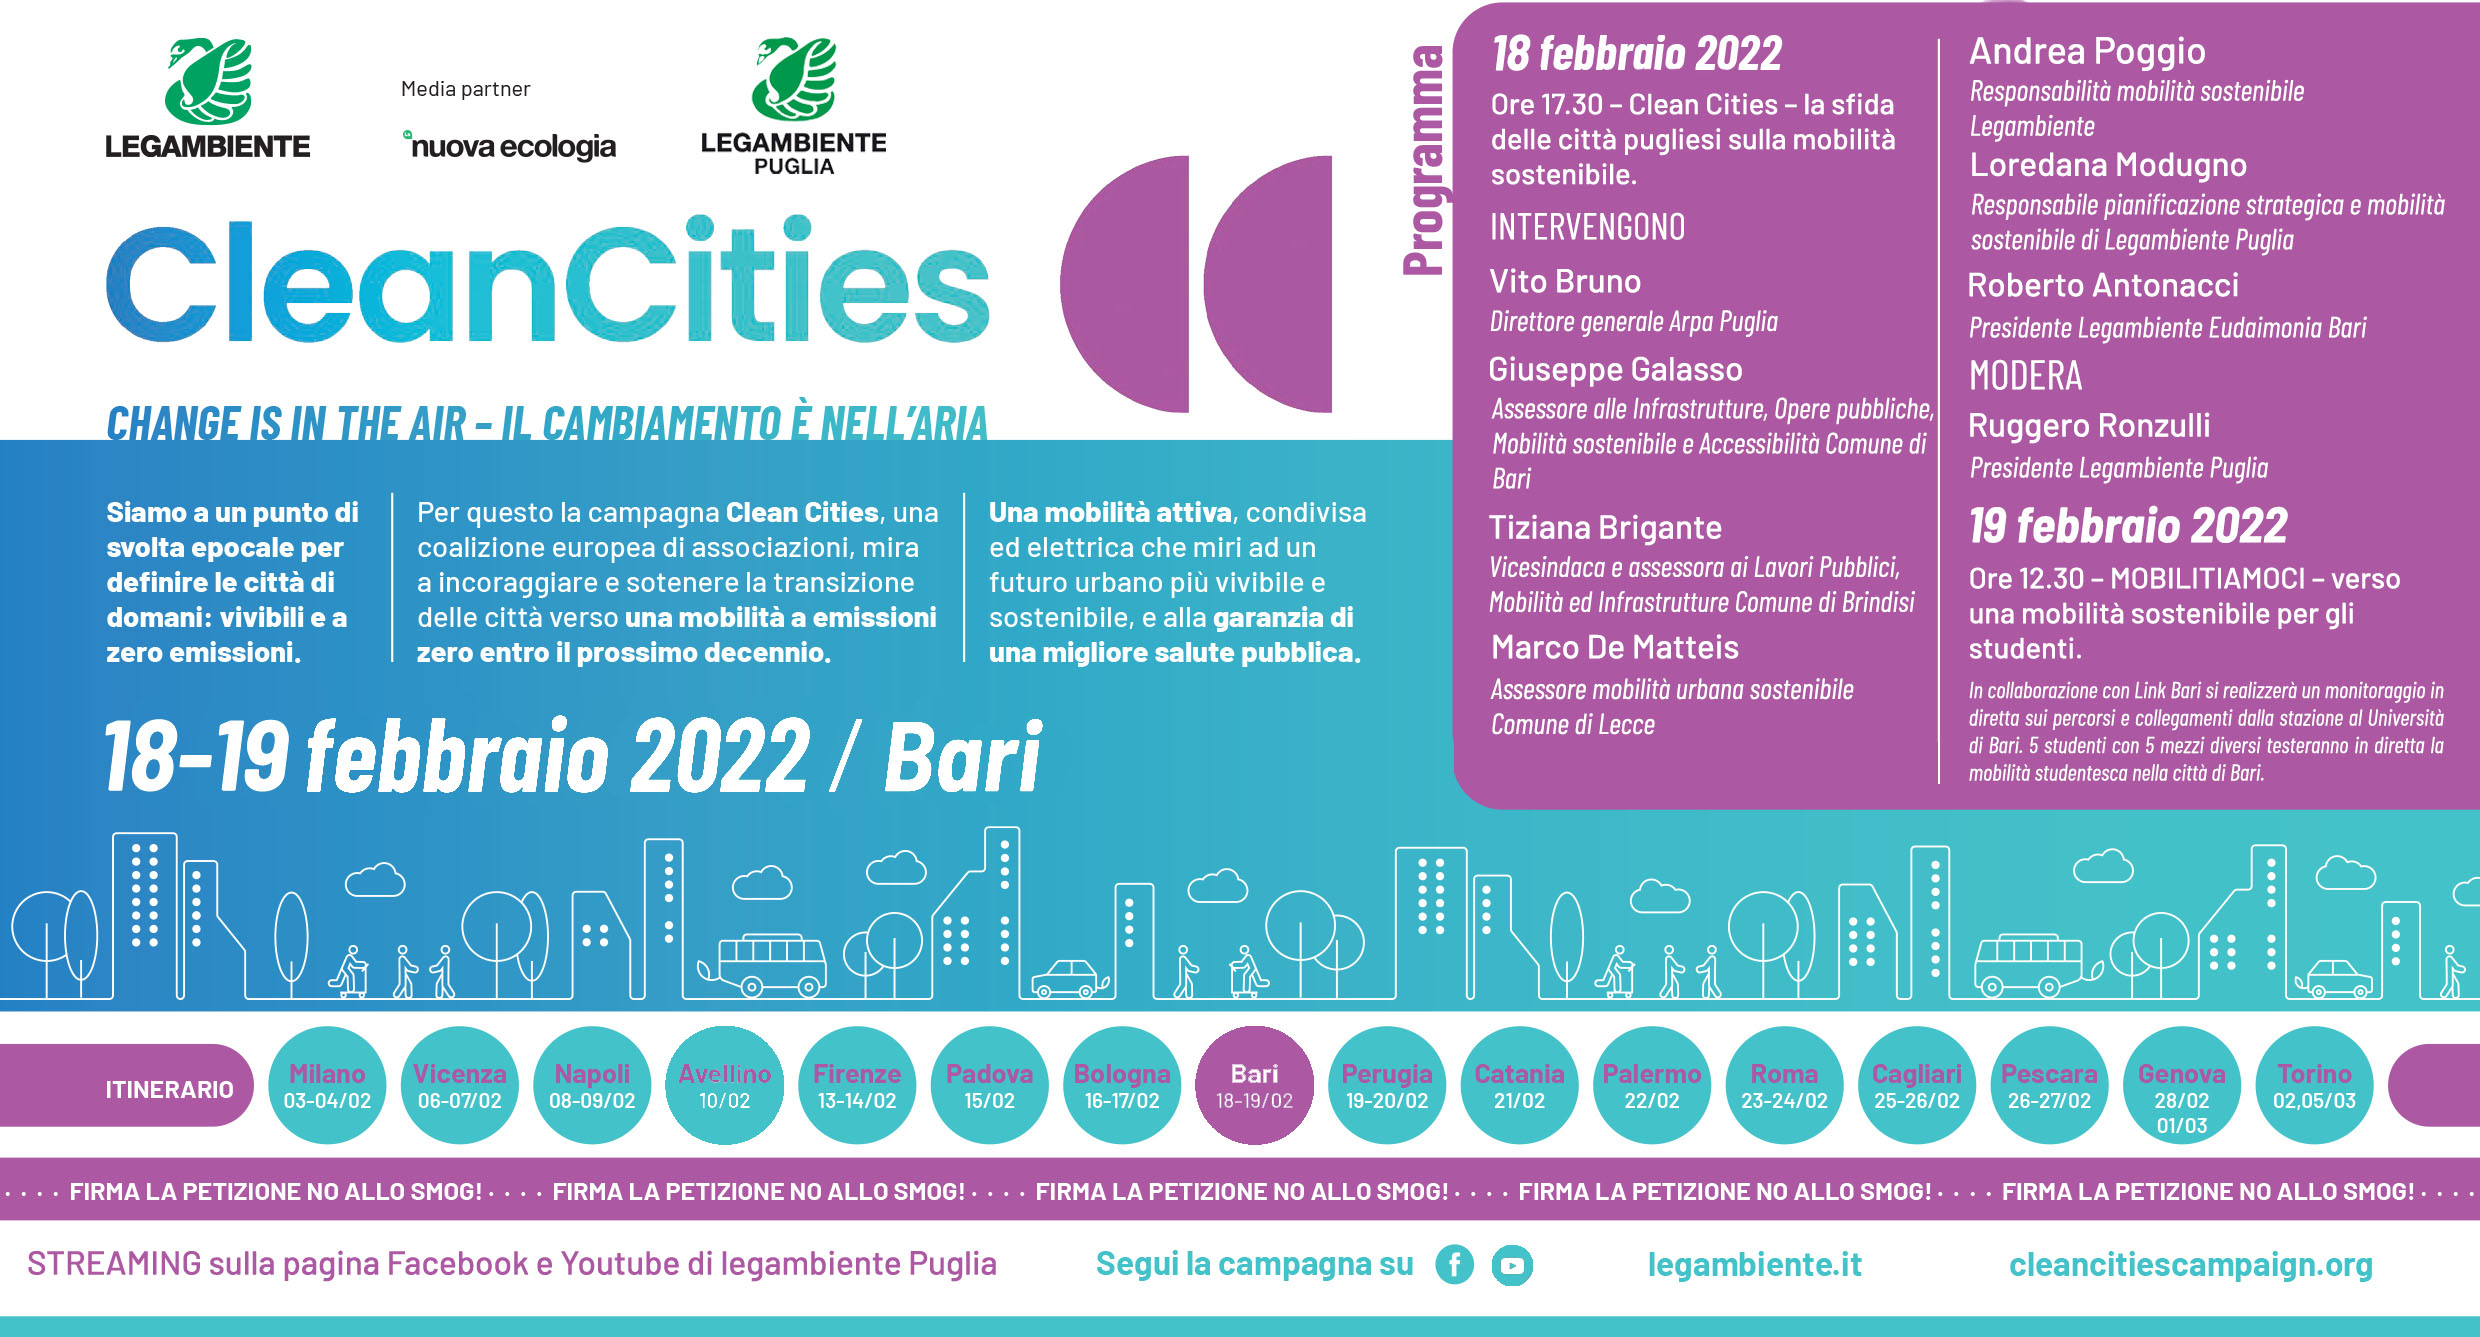 Clean Cities Campaign 2022